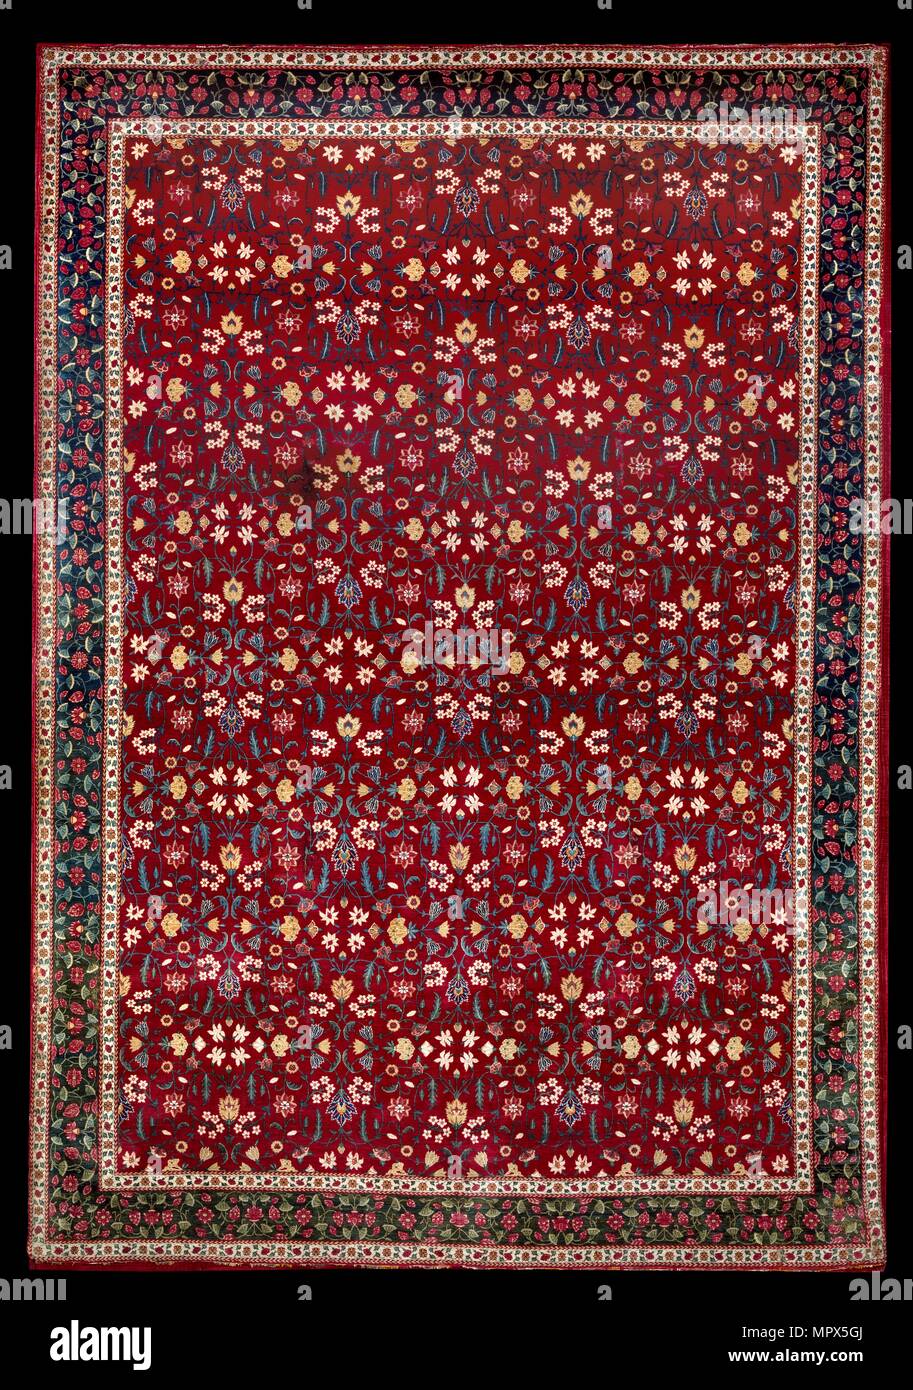 Mughal carpet with floral pattern, late 17th century. Artist: Unknown. Stock Photo